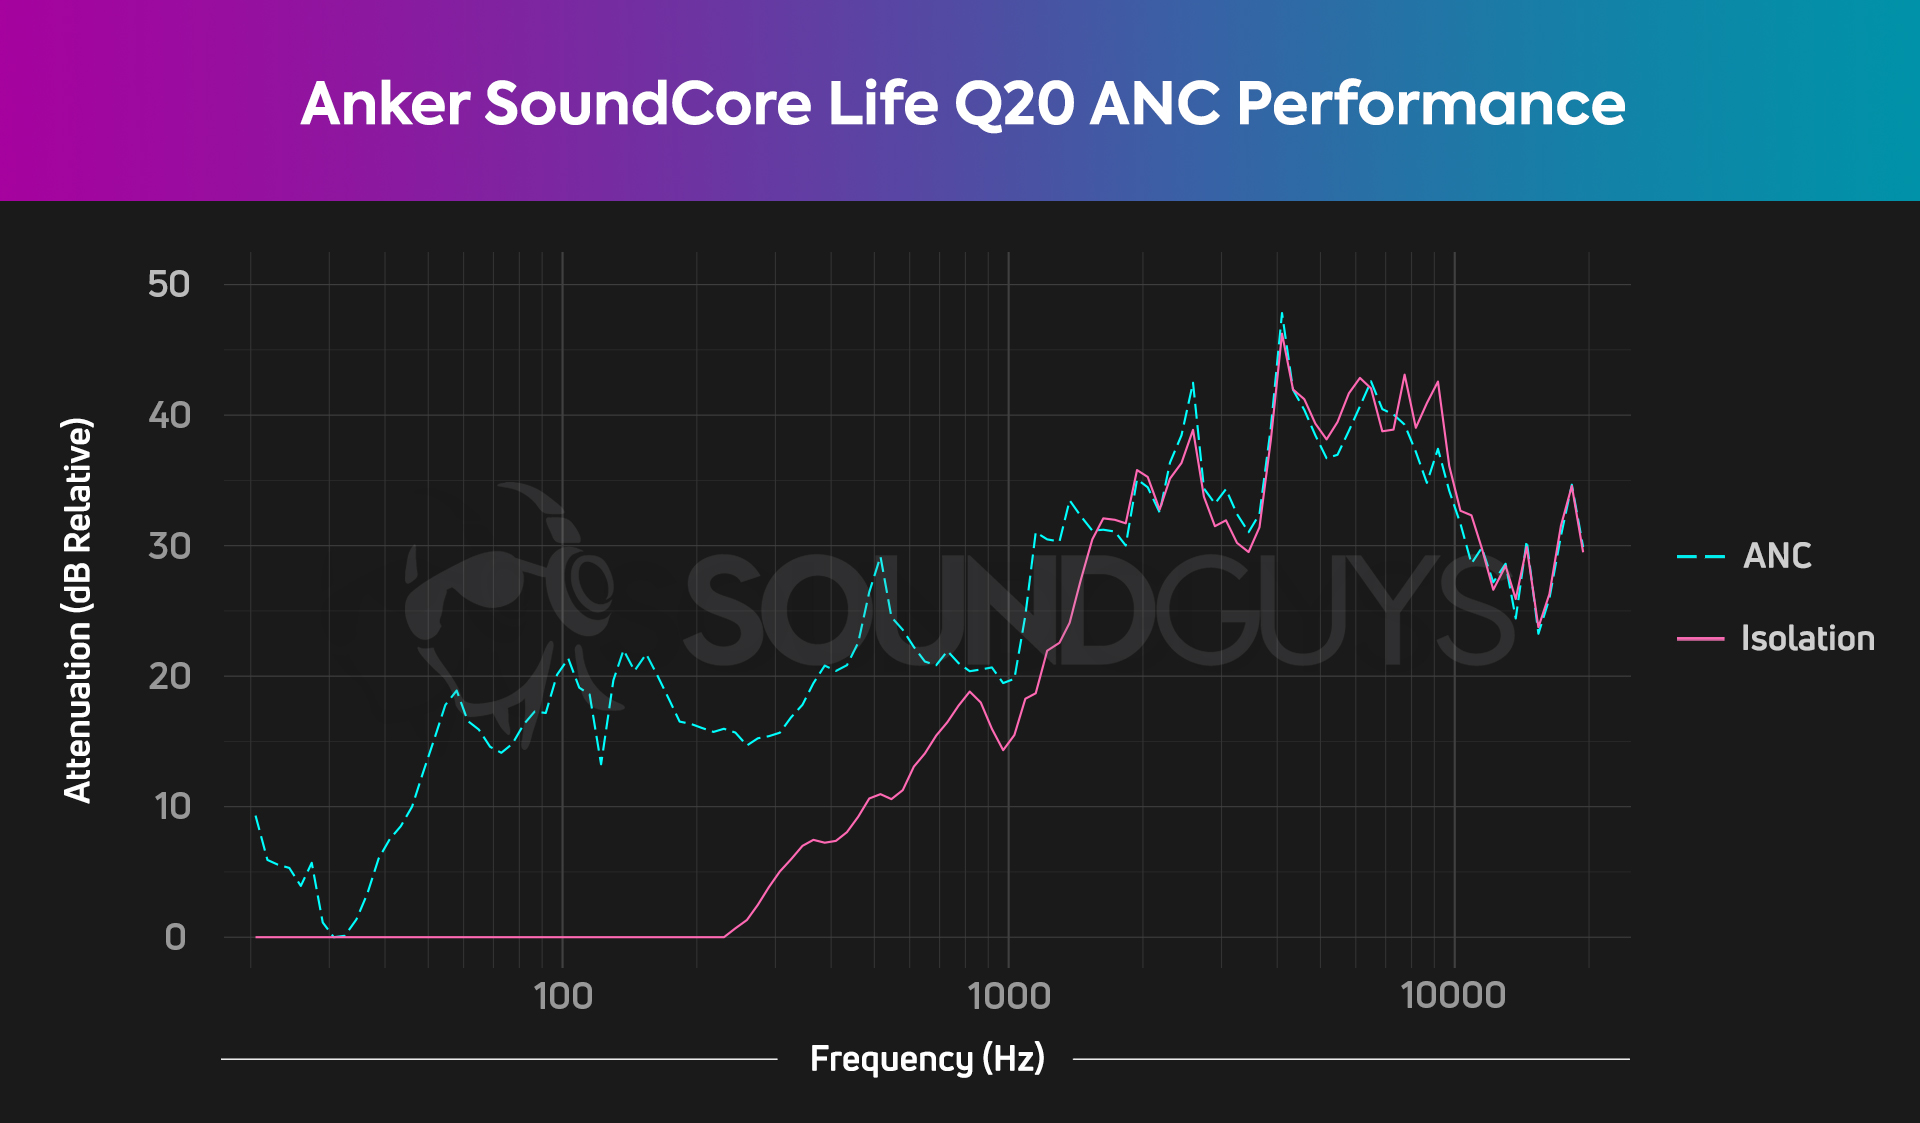 A chart depicts the isolation and noise canceling performance for the Anker Soundcore Life Q20, both of which are quite good.